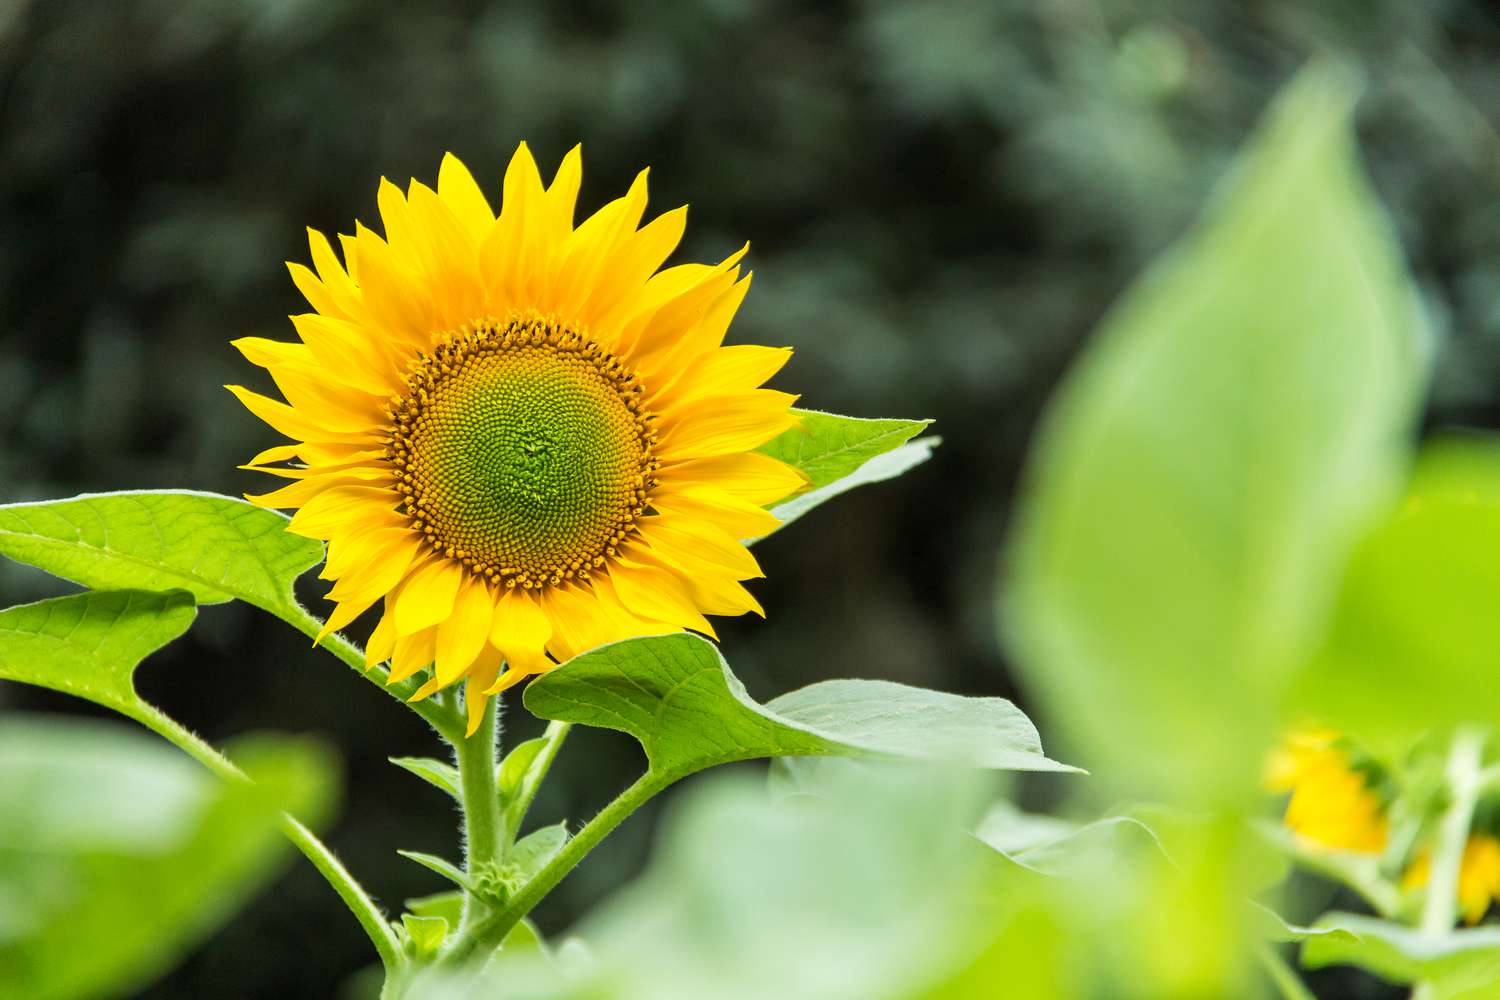 How Often Should I Water Sunflowers